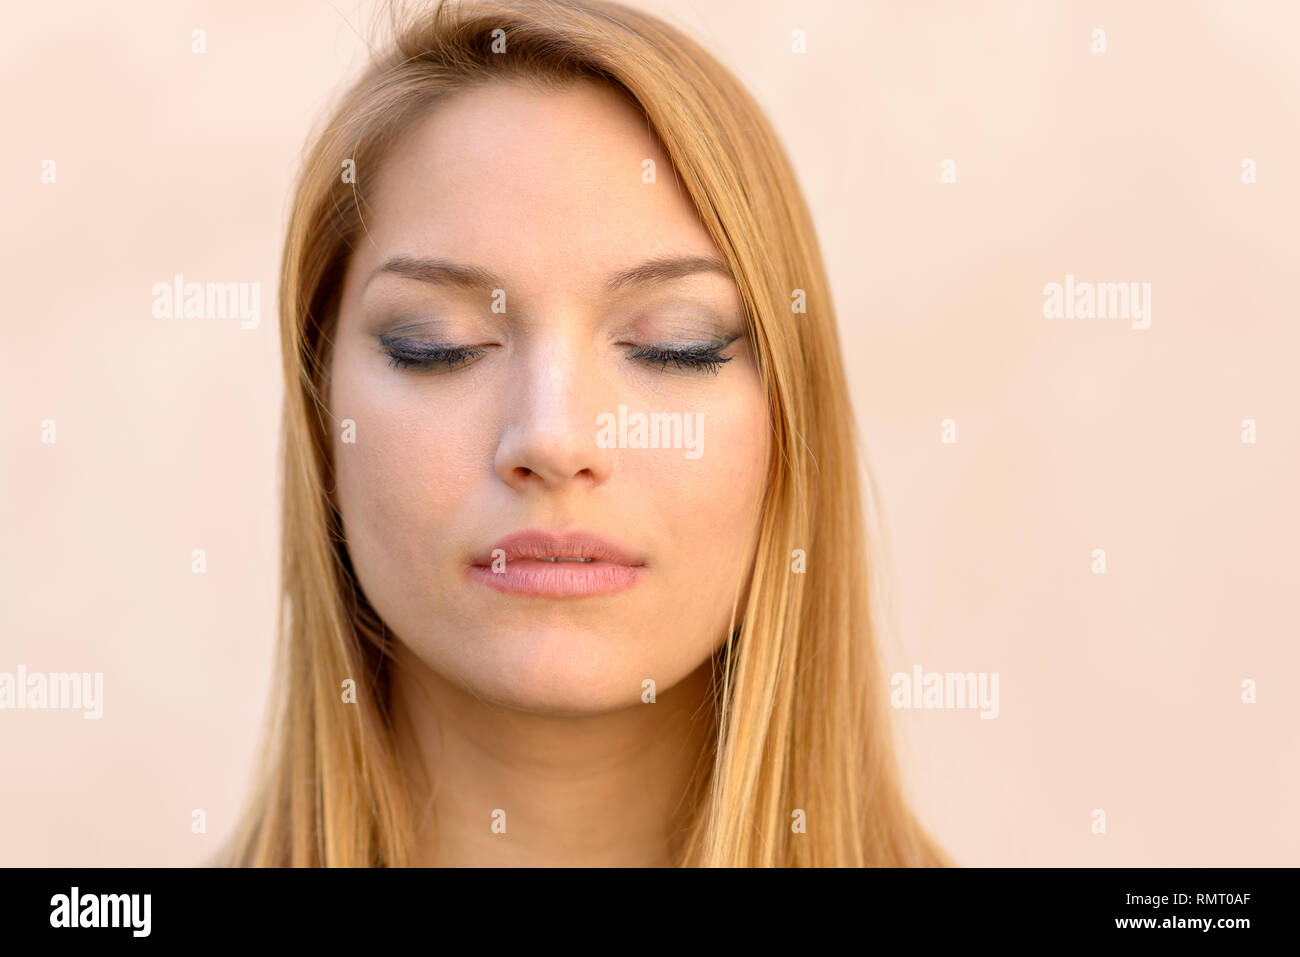 Serene attractive blond woman with her eyes closed relaxing, de-stressing or meditating in a close up head shot portrait over a neutral studio backgro Stock Photo